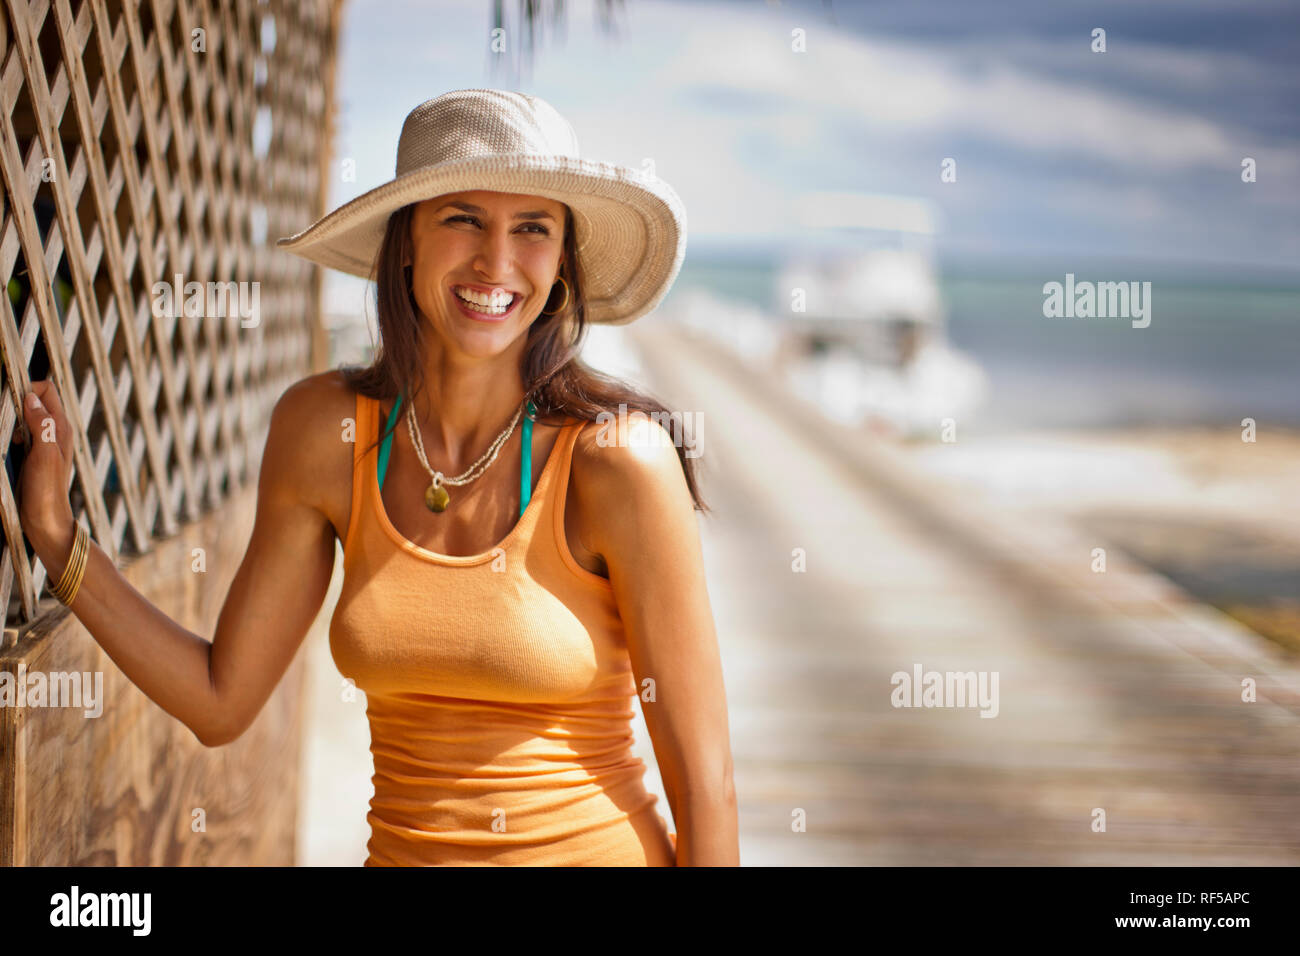 Smiling young woman standing beside a wooden beach hut at a tropical beach. Stock Photo